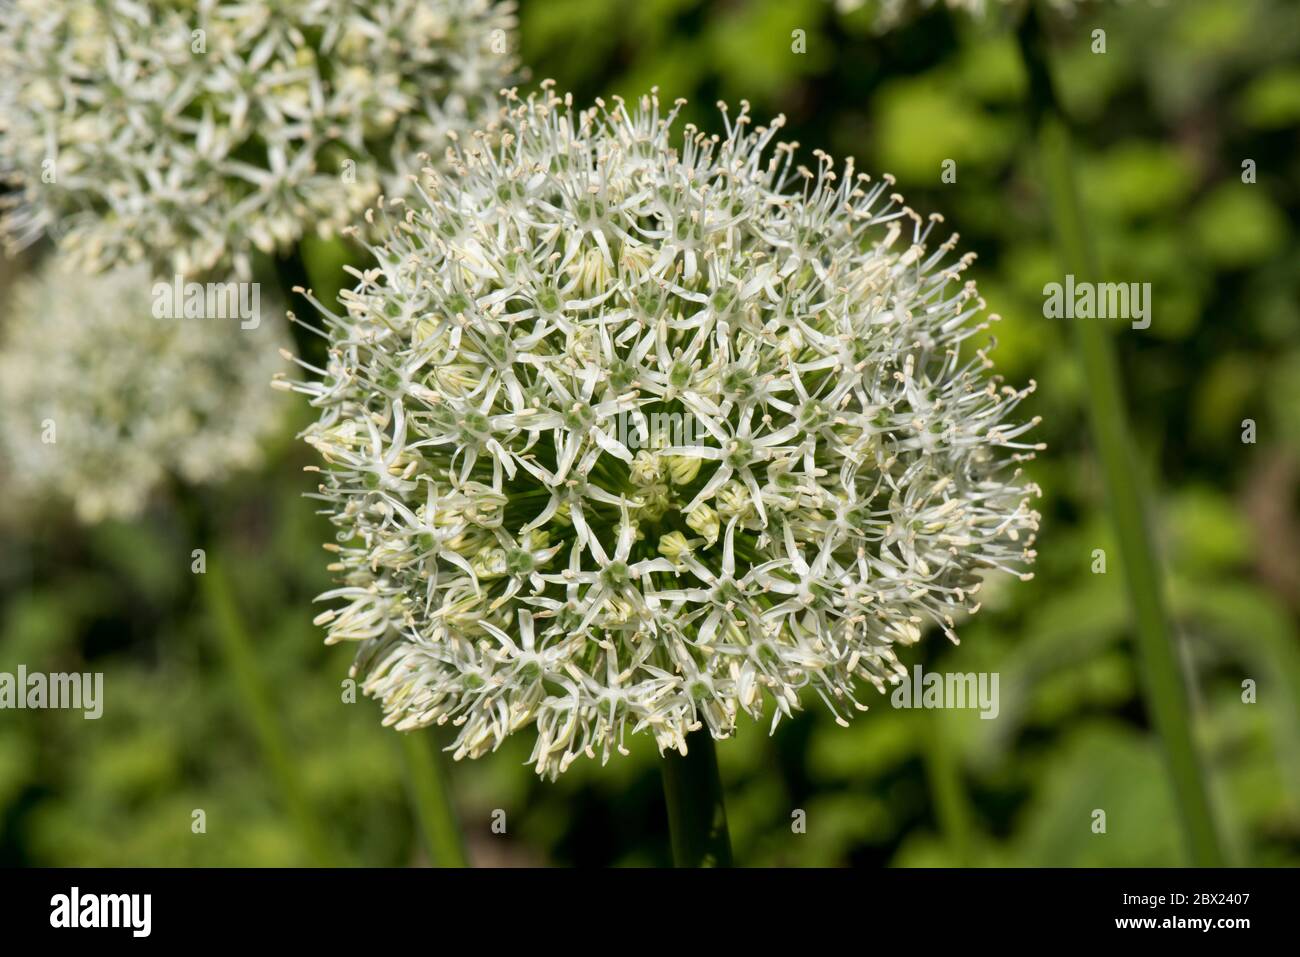 Allium stipitatum 'Mount Everest' sphericical white crowded umbel of small flowers in late spring, May, Berkshire Stock Photo